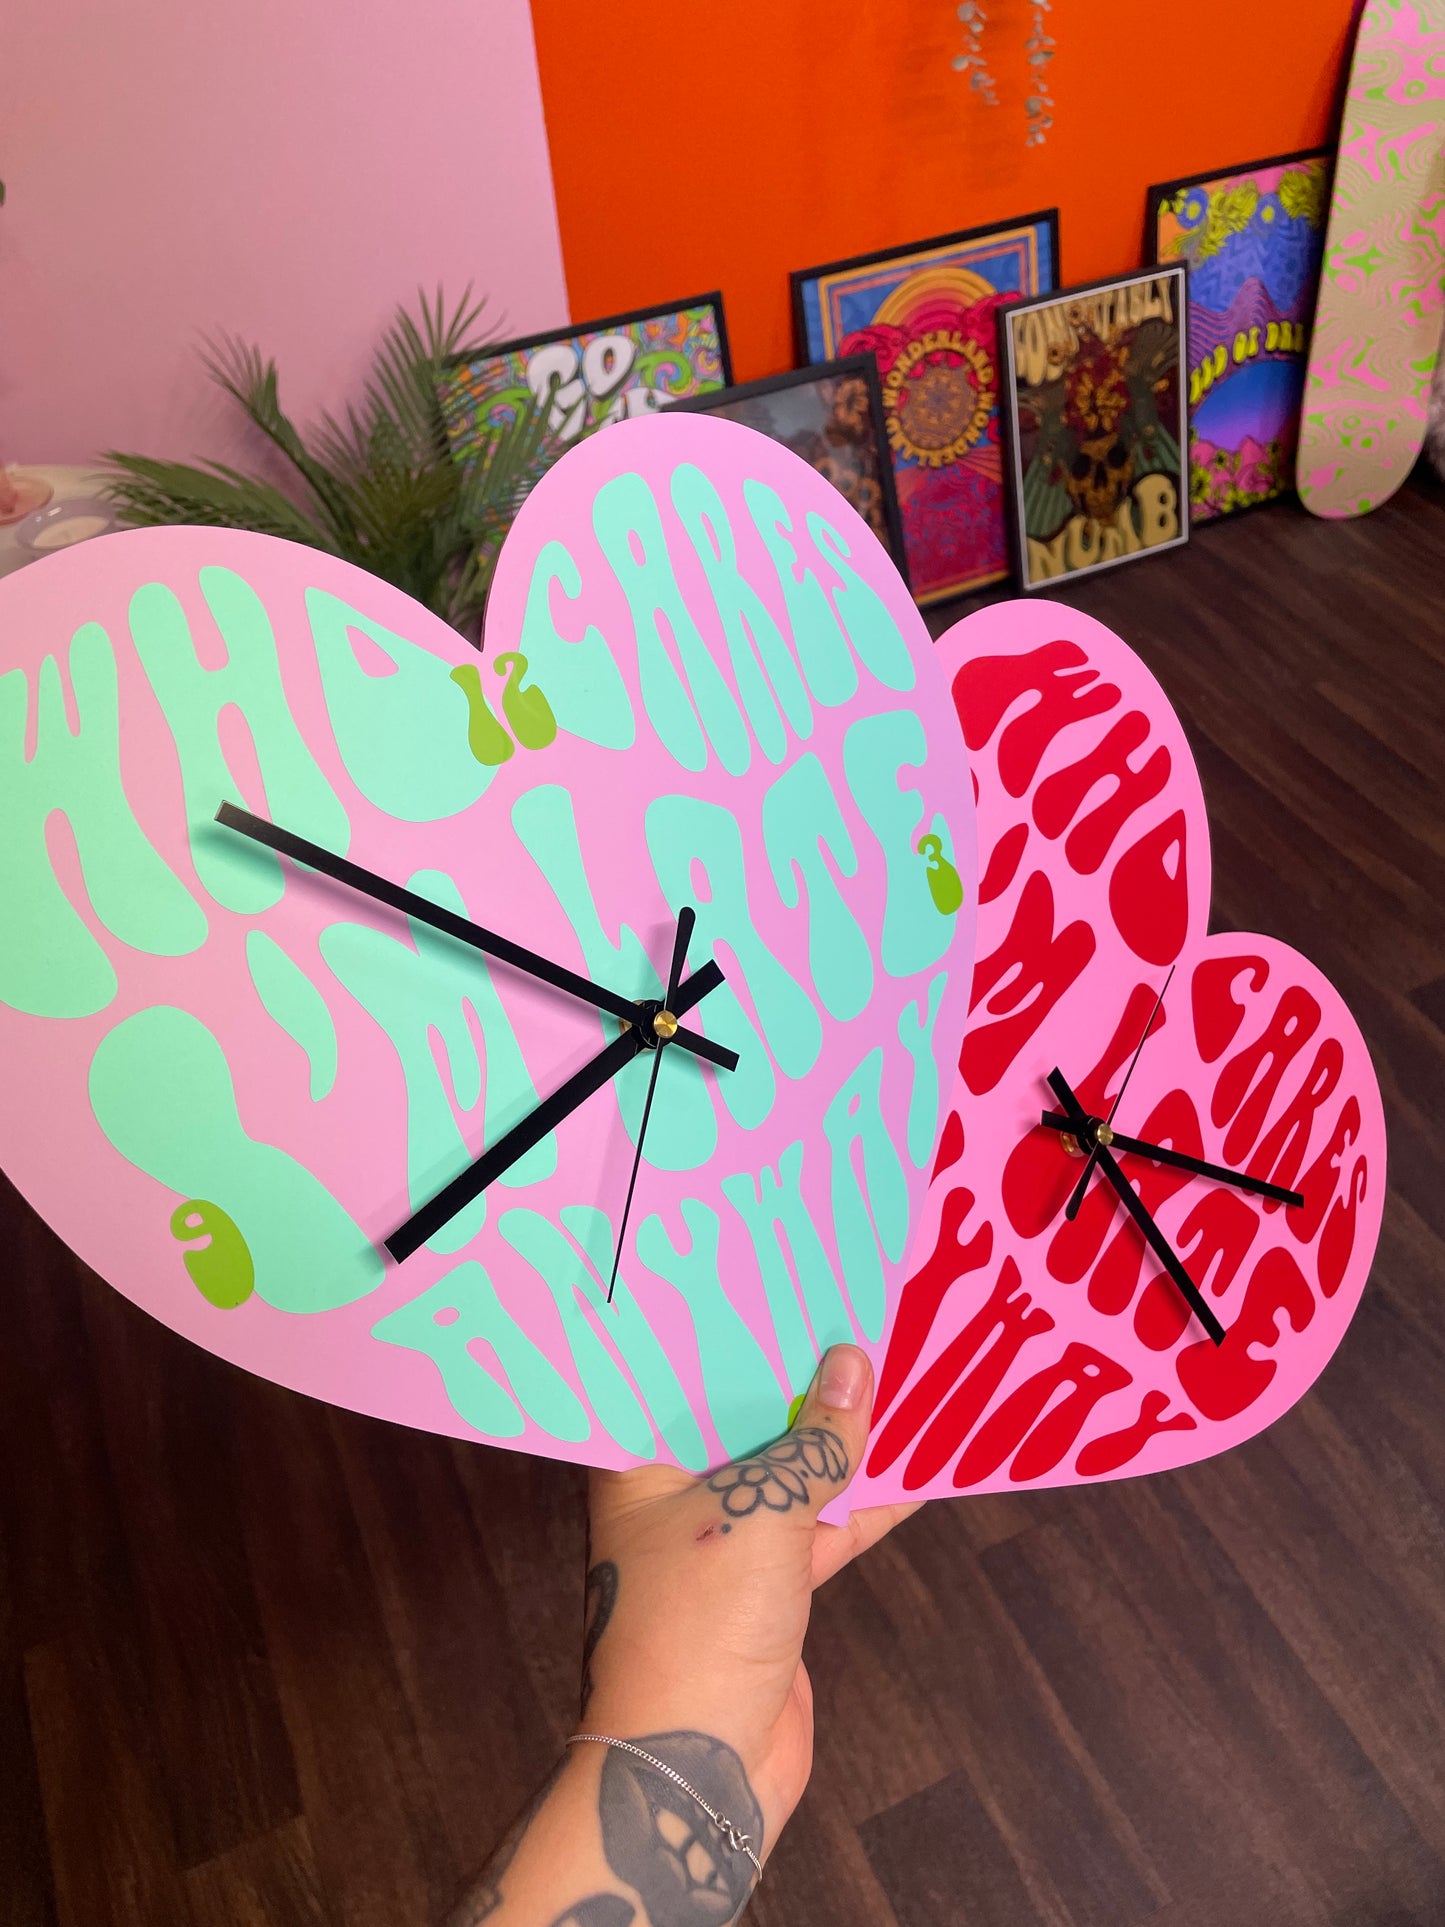 Who cares i'm late anyway heart shaped decorative clock silent movement